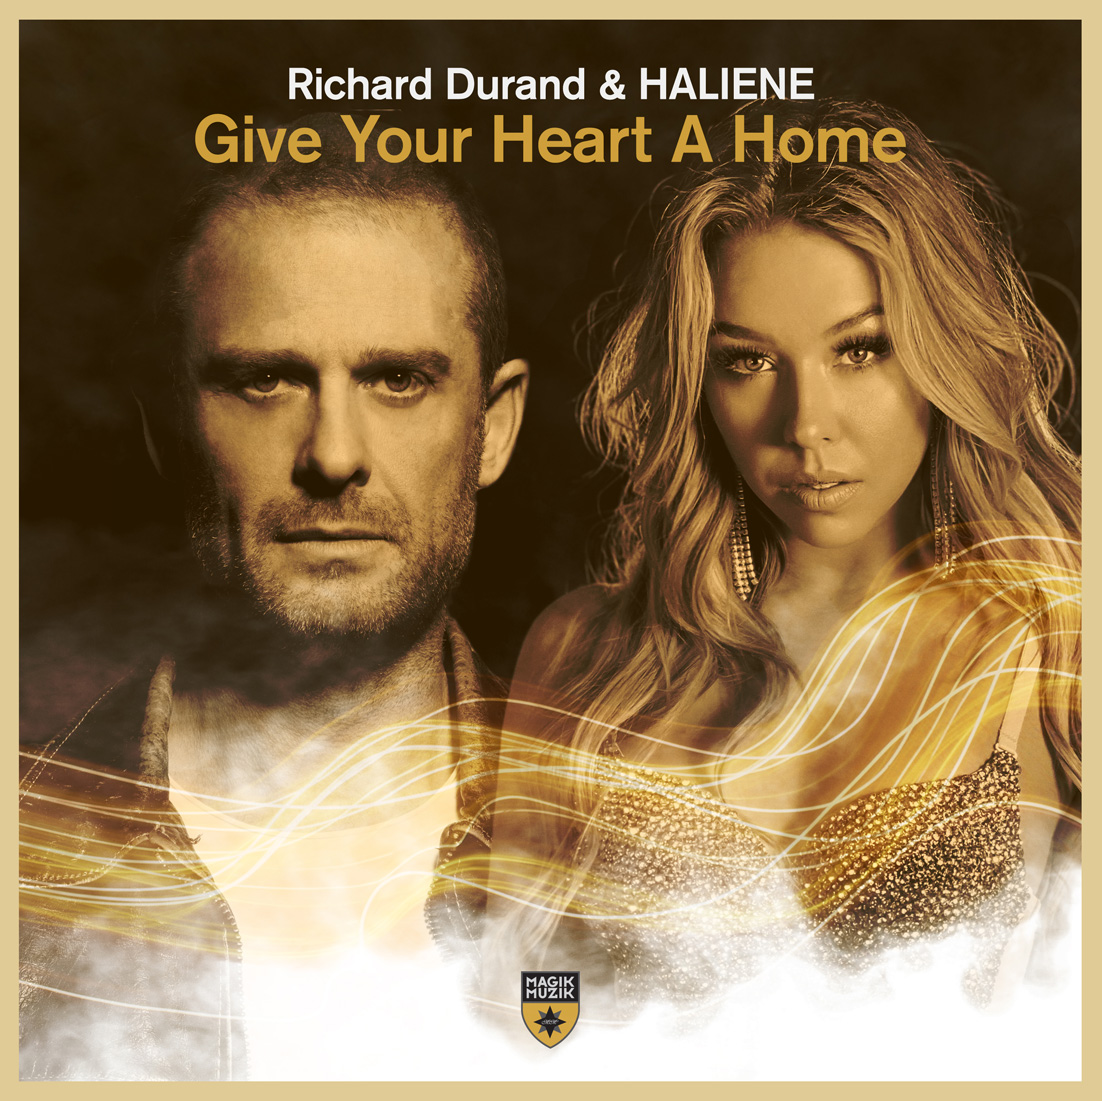 Richard Durand and HALIENE presents Give Your Heart A Home on Black Hole Recordings